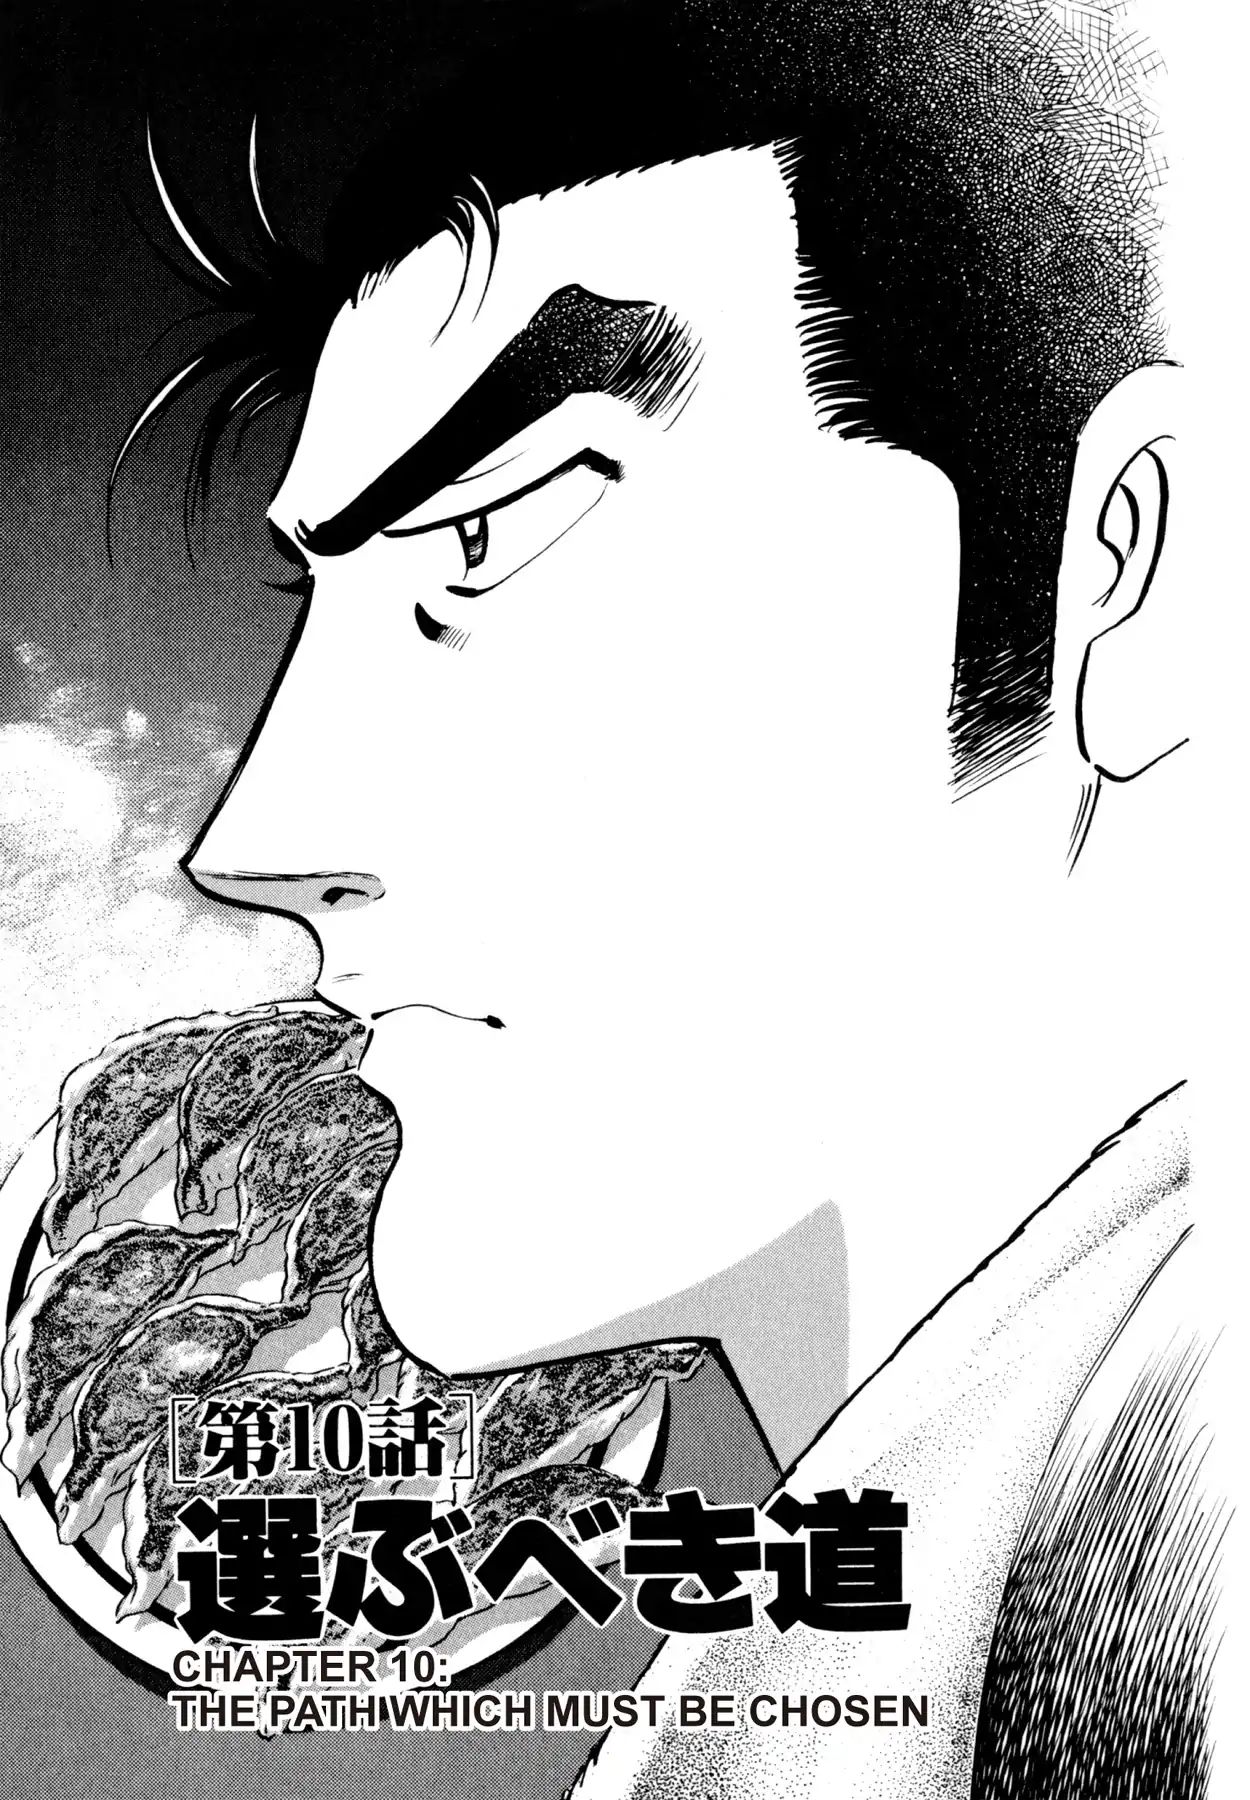 Shoku King VOL.2 CHAPTER 10: THE PATH WHICH MUST BE CHOSEN